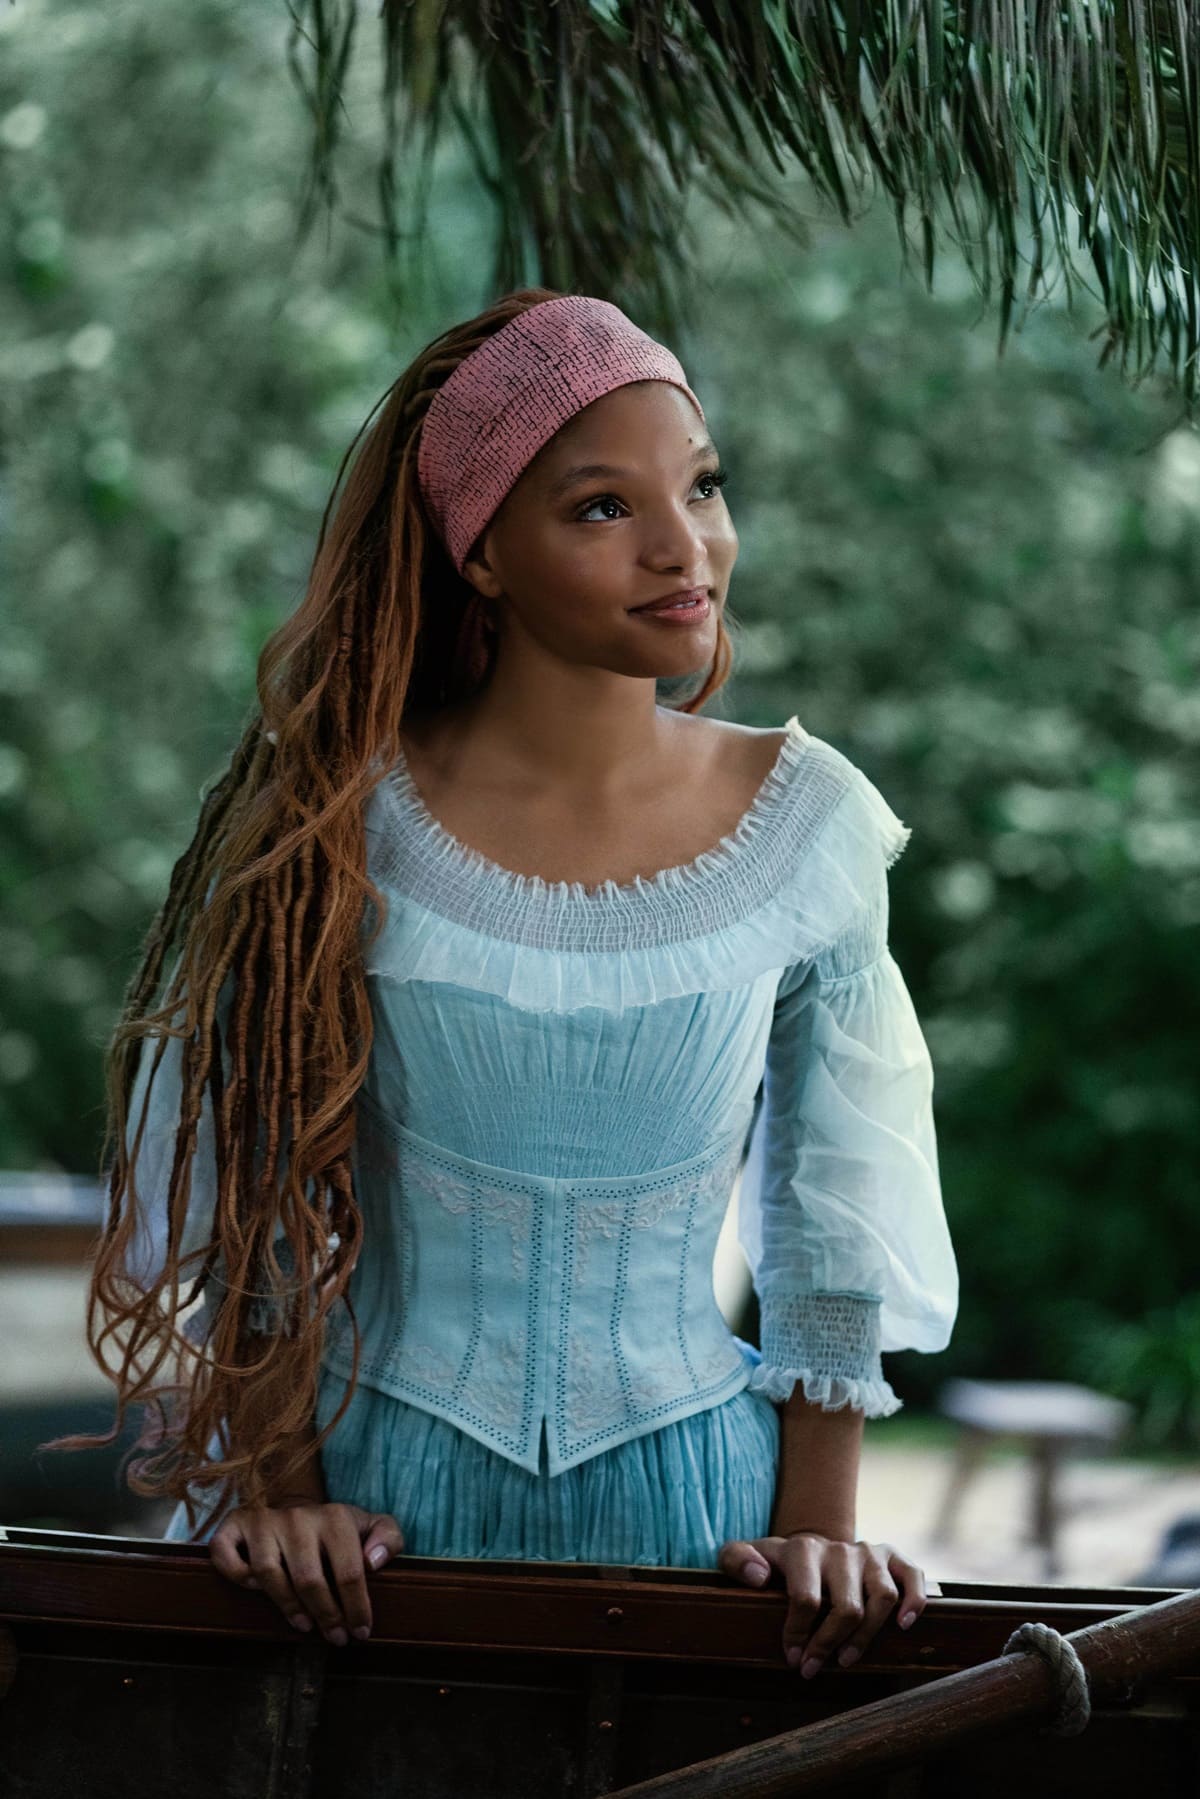 Halle Bailey humorously mentioned that she almost broke her neck while recreating the famous 'hair flip' scene from "The Little Mermaid" due to the heavy weight of her wig